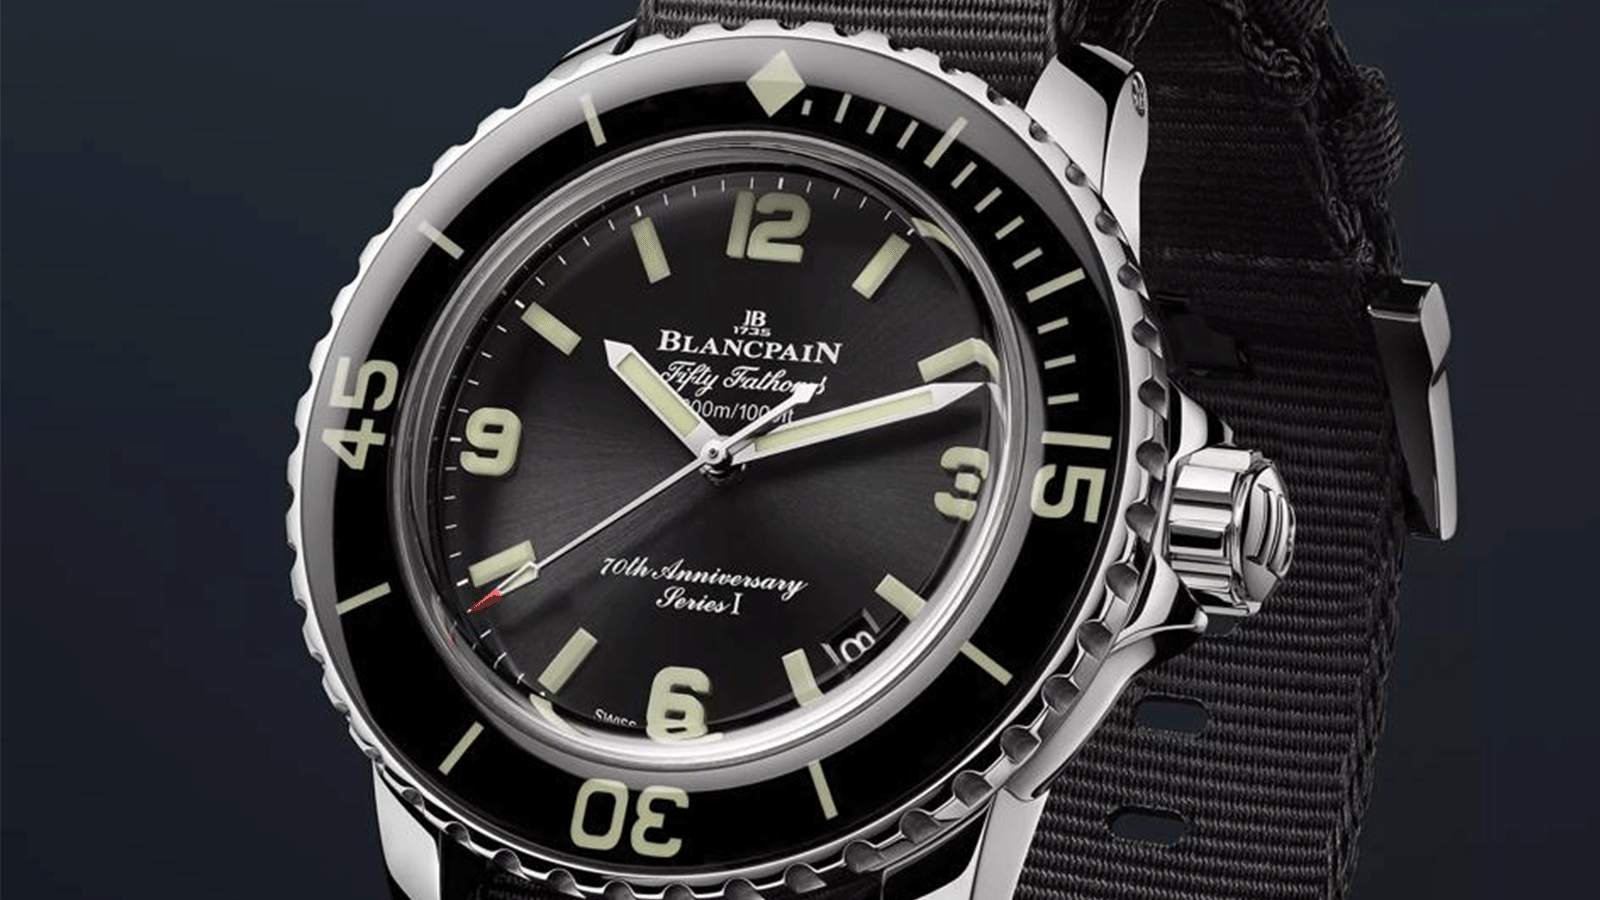 In 1953, Blancpain launched Fifty Fathoms, the first true diving watch. In 2003, to celebrate its 50th anniversary, a contemporary version was launched with a limited-edition three-part series of 50 timepieces each. This year, to mark its 70th anniversary, Blancpain is unveiling its first anniversary watch.